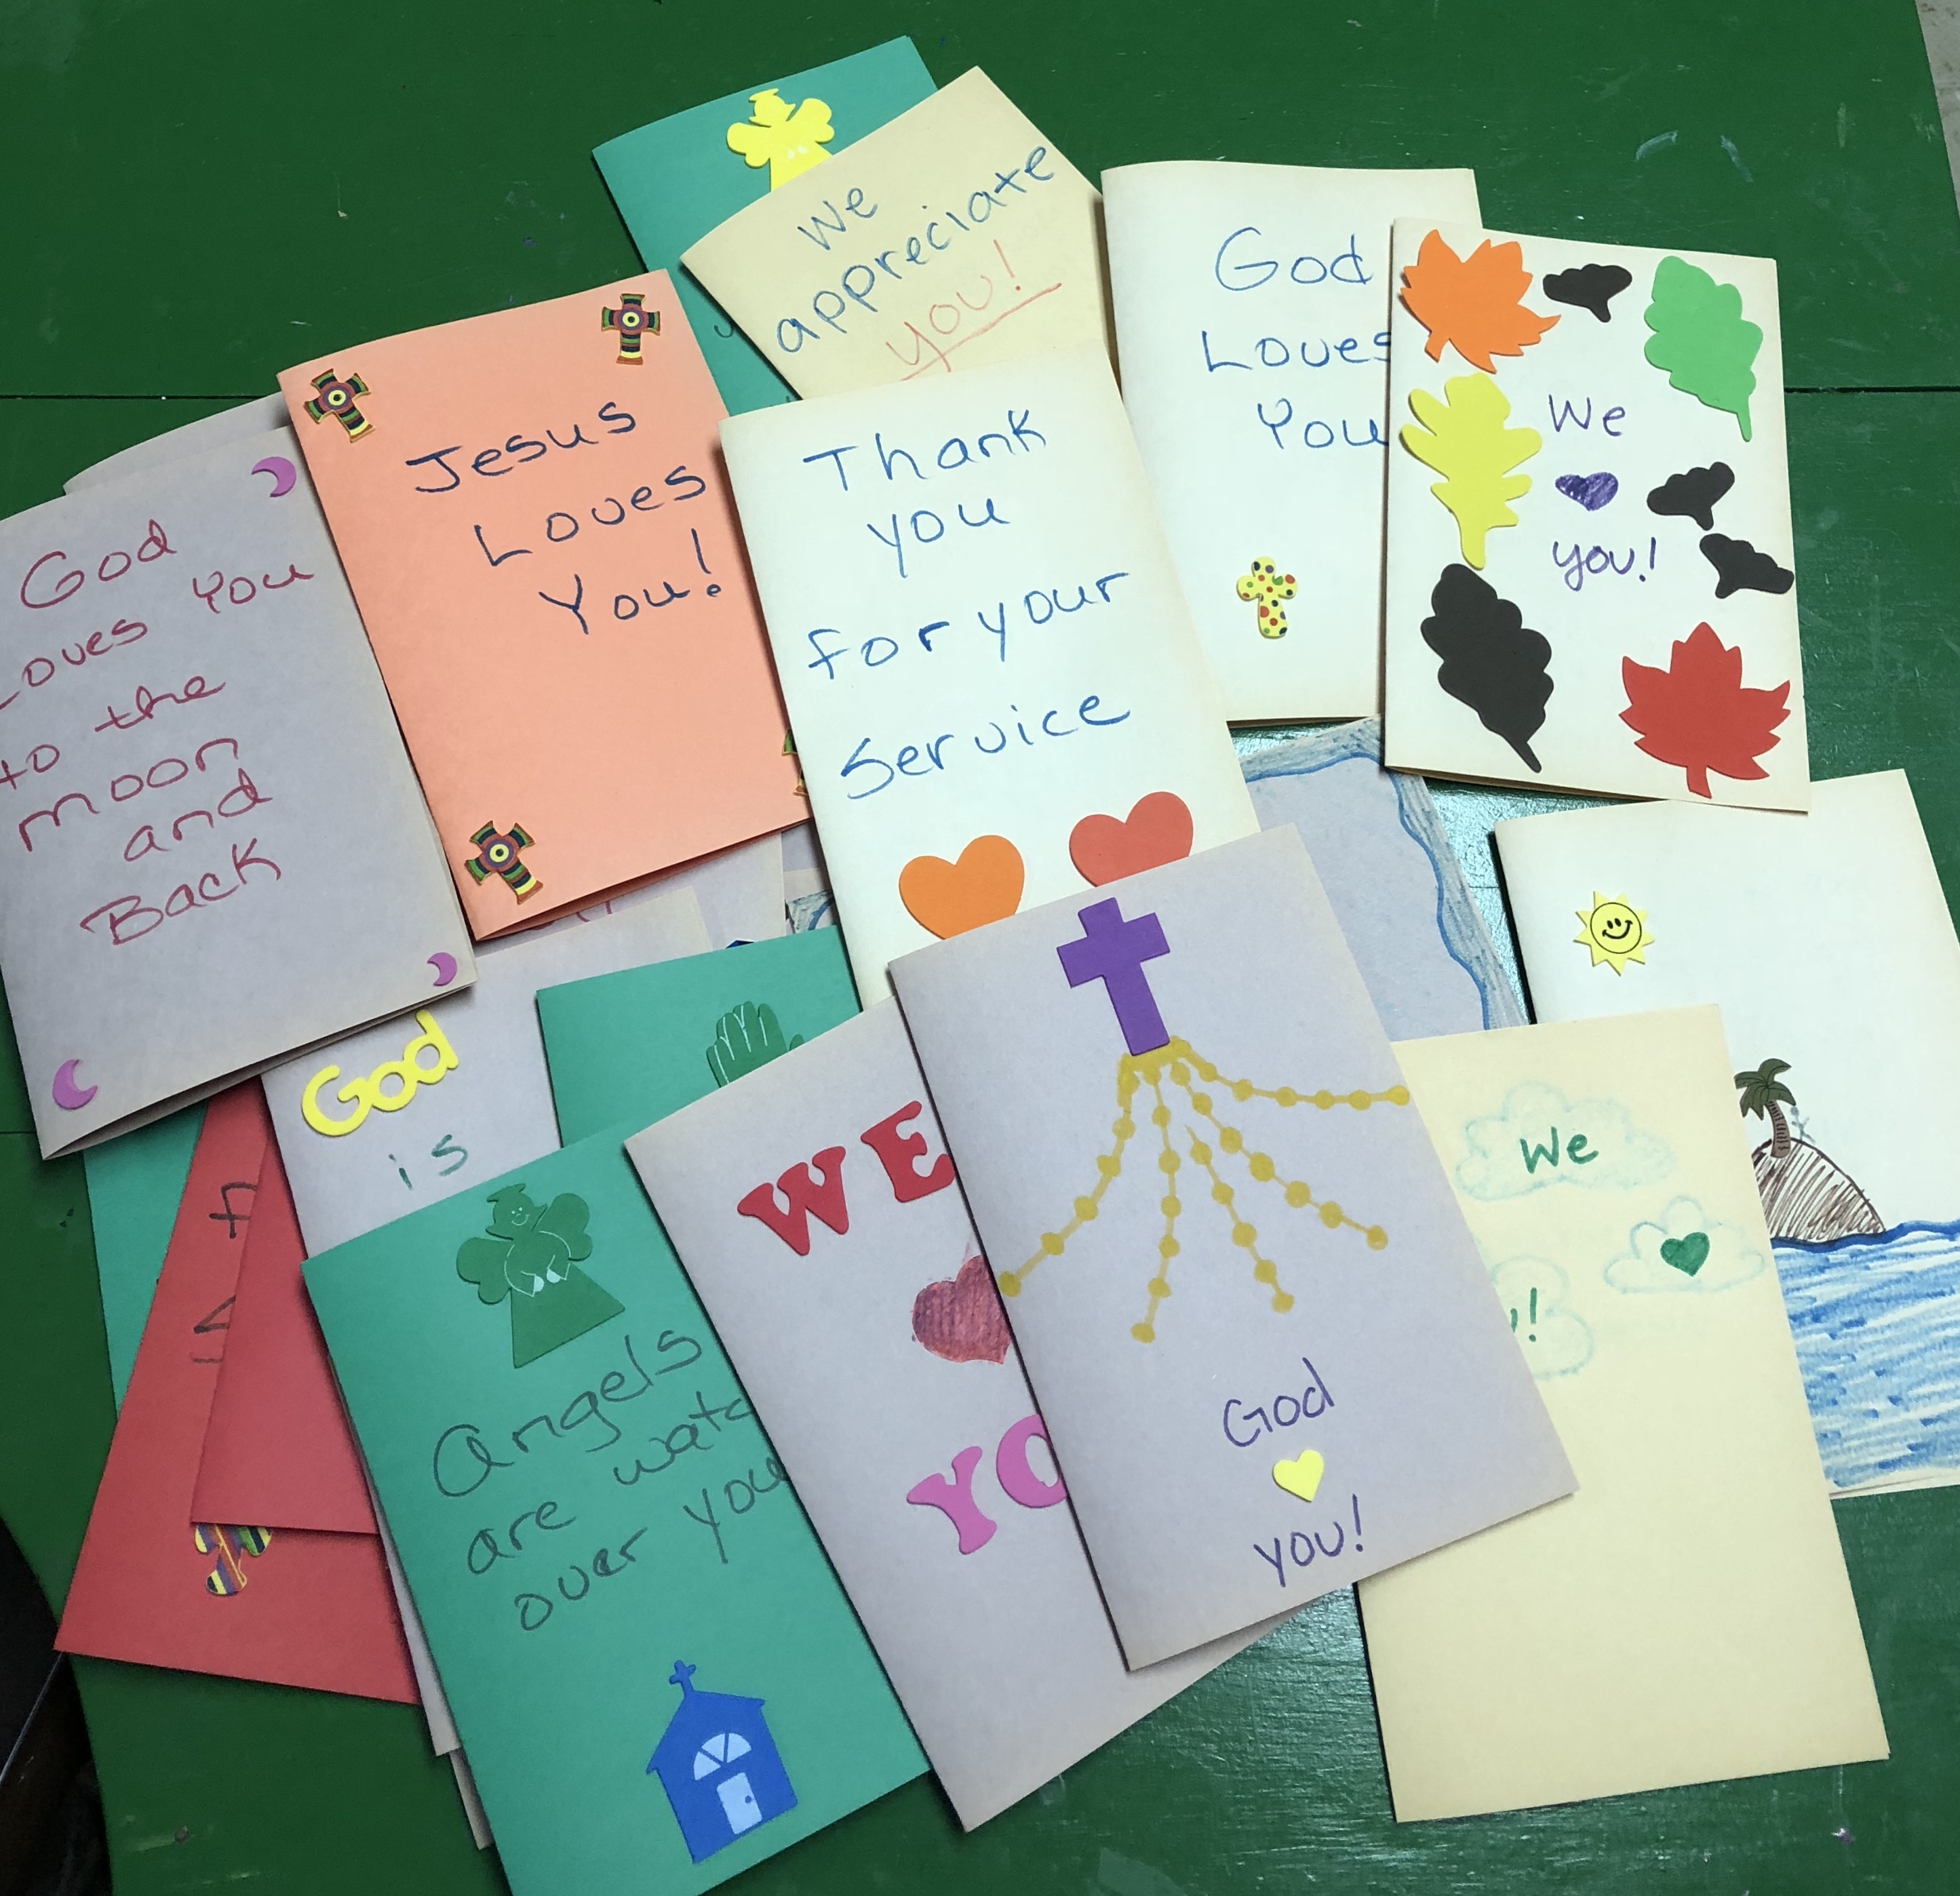 The Sunday School children made cards for the Veterans service project of Altrusa Club.